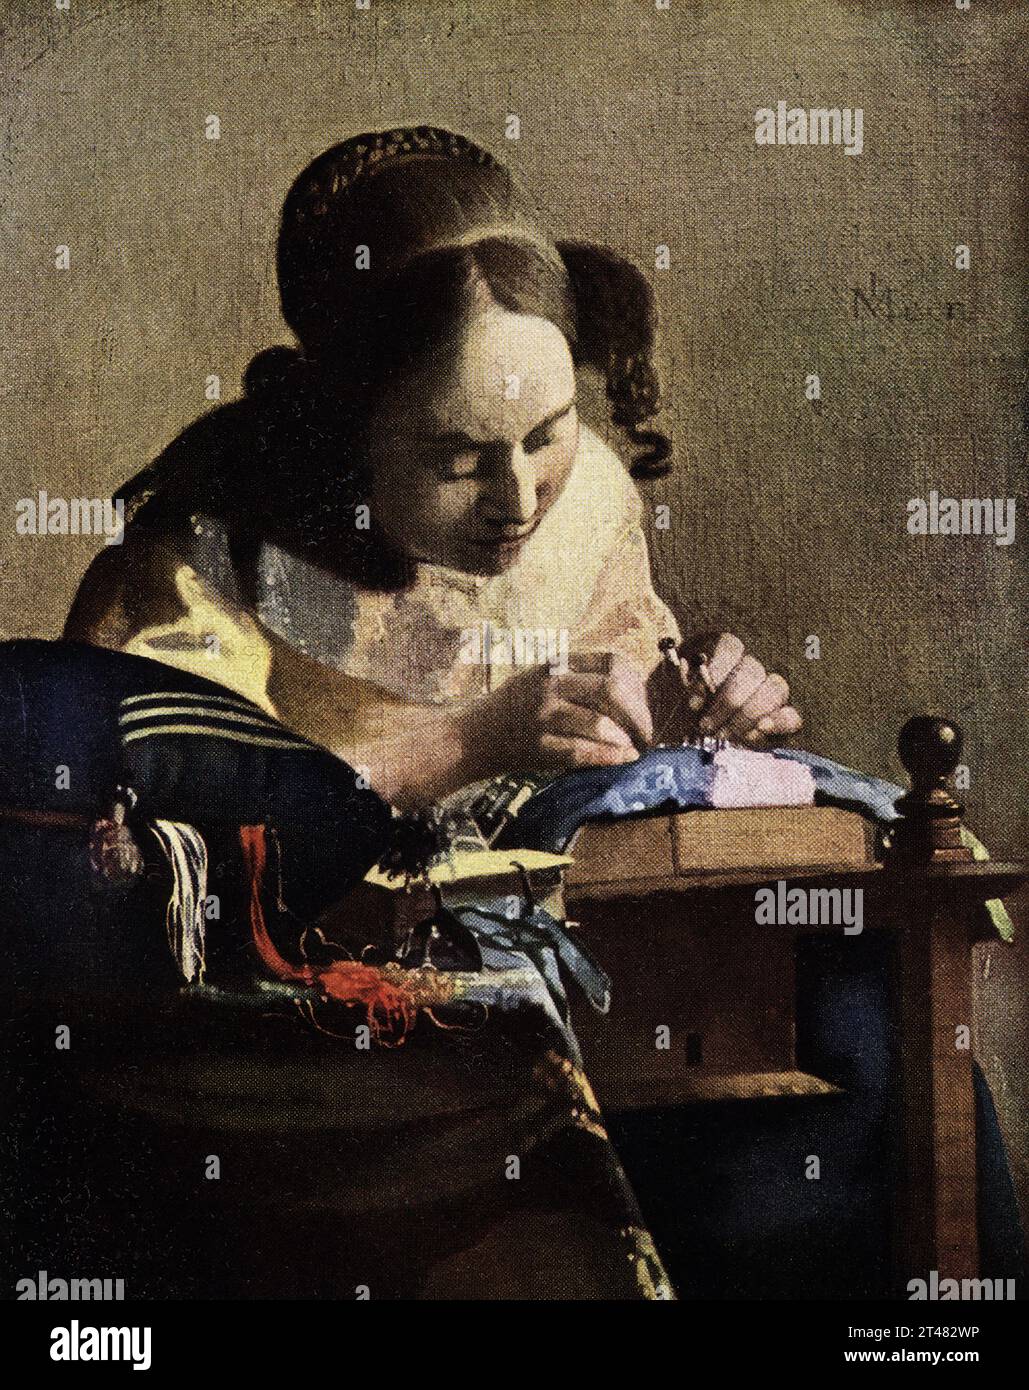 The 1916 caption reads: “Vermeer of Delft 1632-1675 Dutch School The Lace Maker La Dentelliere in Louvre J v Meer -first three letters being intertwined. Painted in oil on canvas. 9.5 in square Johannes Vermeer was a Dutch Baroque Period painter who specialized in domestic interior scenes of middle-class life. He is considered one of the greatest painters of the Dutch Golden Age along with Rembrandt Stock Photo